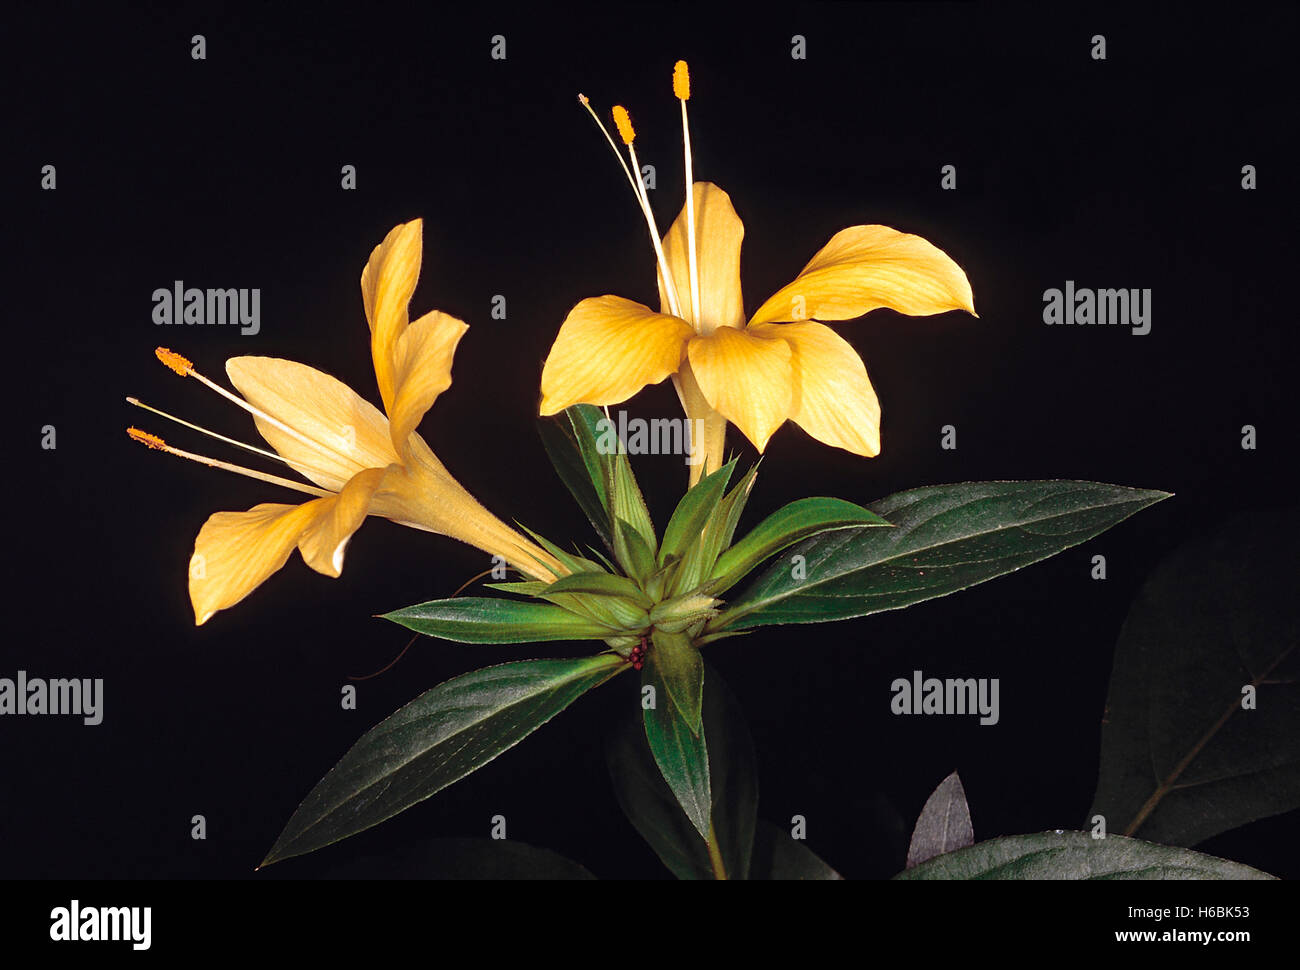 Barleria Prionitis. Family: Acanthaceae. A shrub with extremely sharp and pointed bracts. Stock Photo